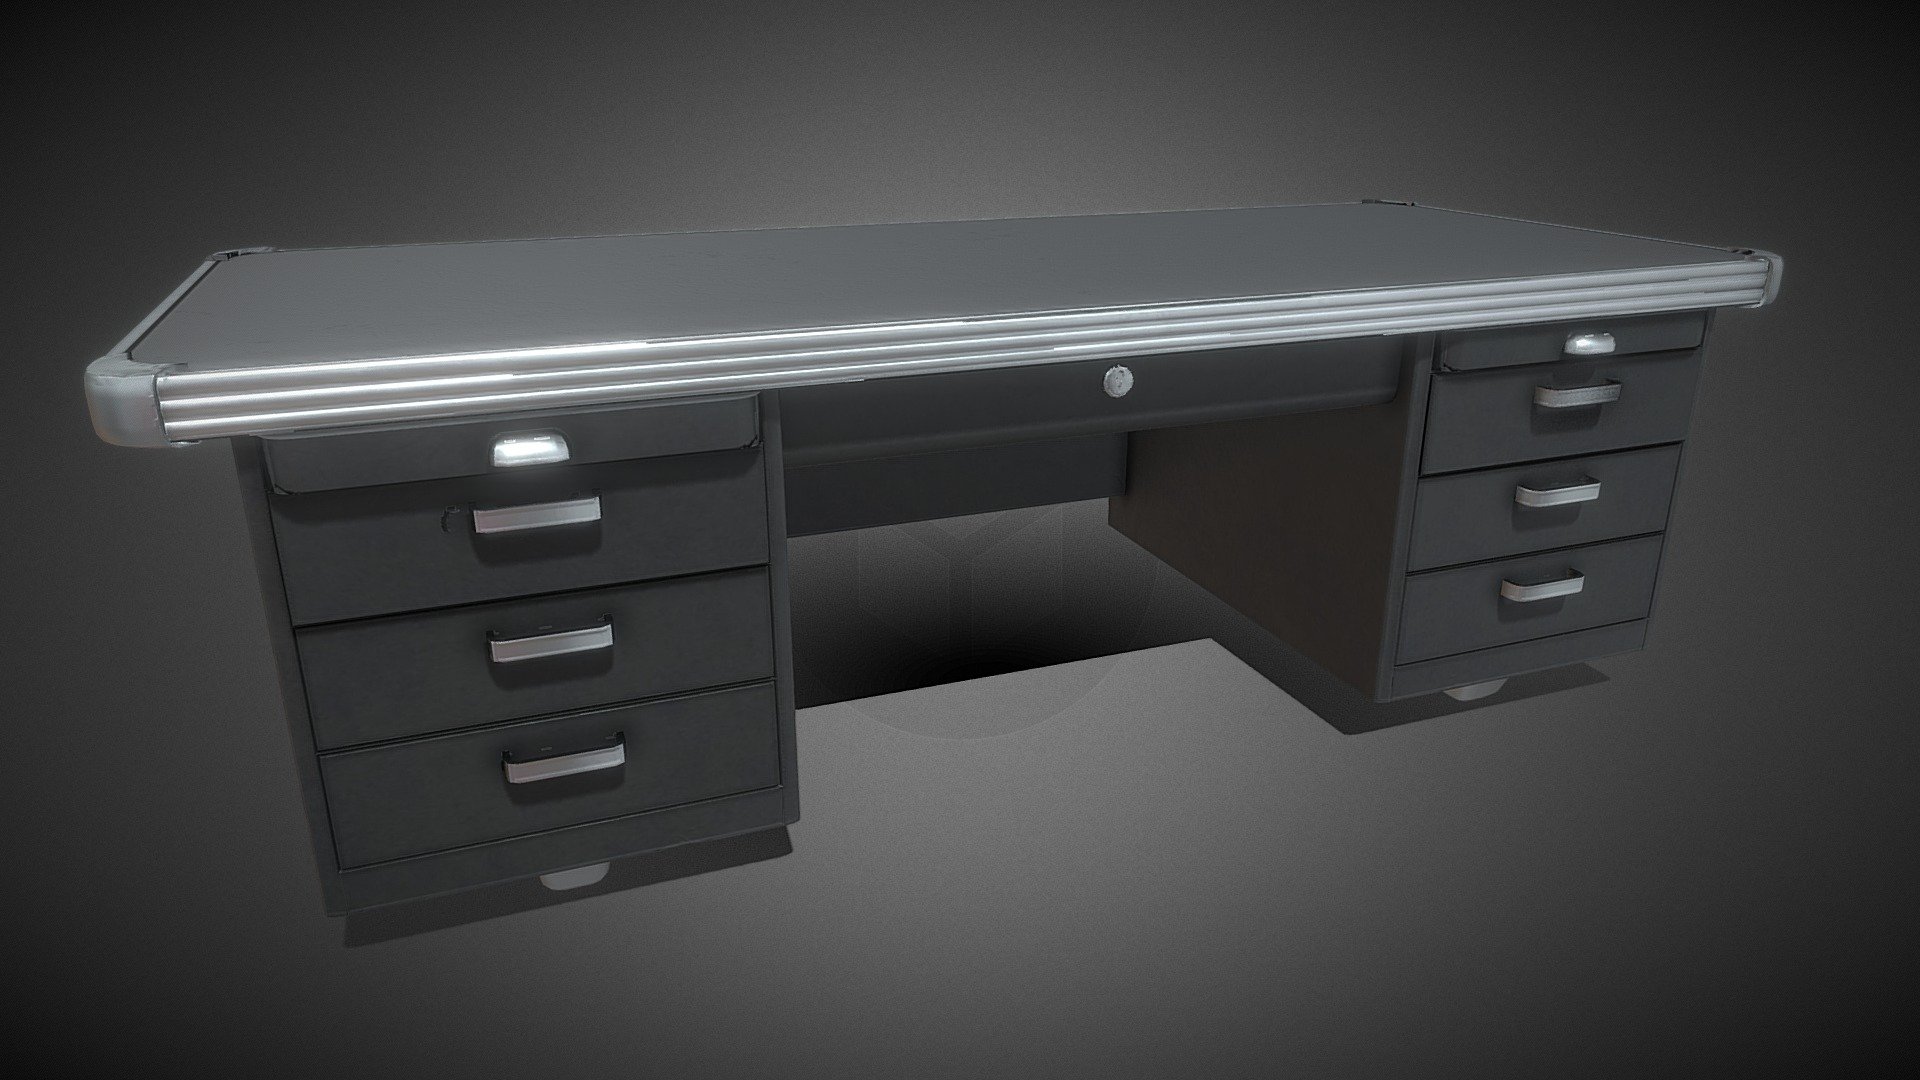 Modern high end office desk inspired by 1940s and 50s tanker desks. 

Top drawers open and have interior textures. Can be utilized for dynamic asset variations or loot animations.

Optimized for UE5 and Unity. Includes Base color, roughness, metallic, ambient occlusion and normal maps - Modern Luxury Office Desk Low Poly - Buy Royalty Free 3D model by Anthony Pilcher (@AnthonyPilcher) 3d model